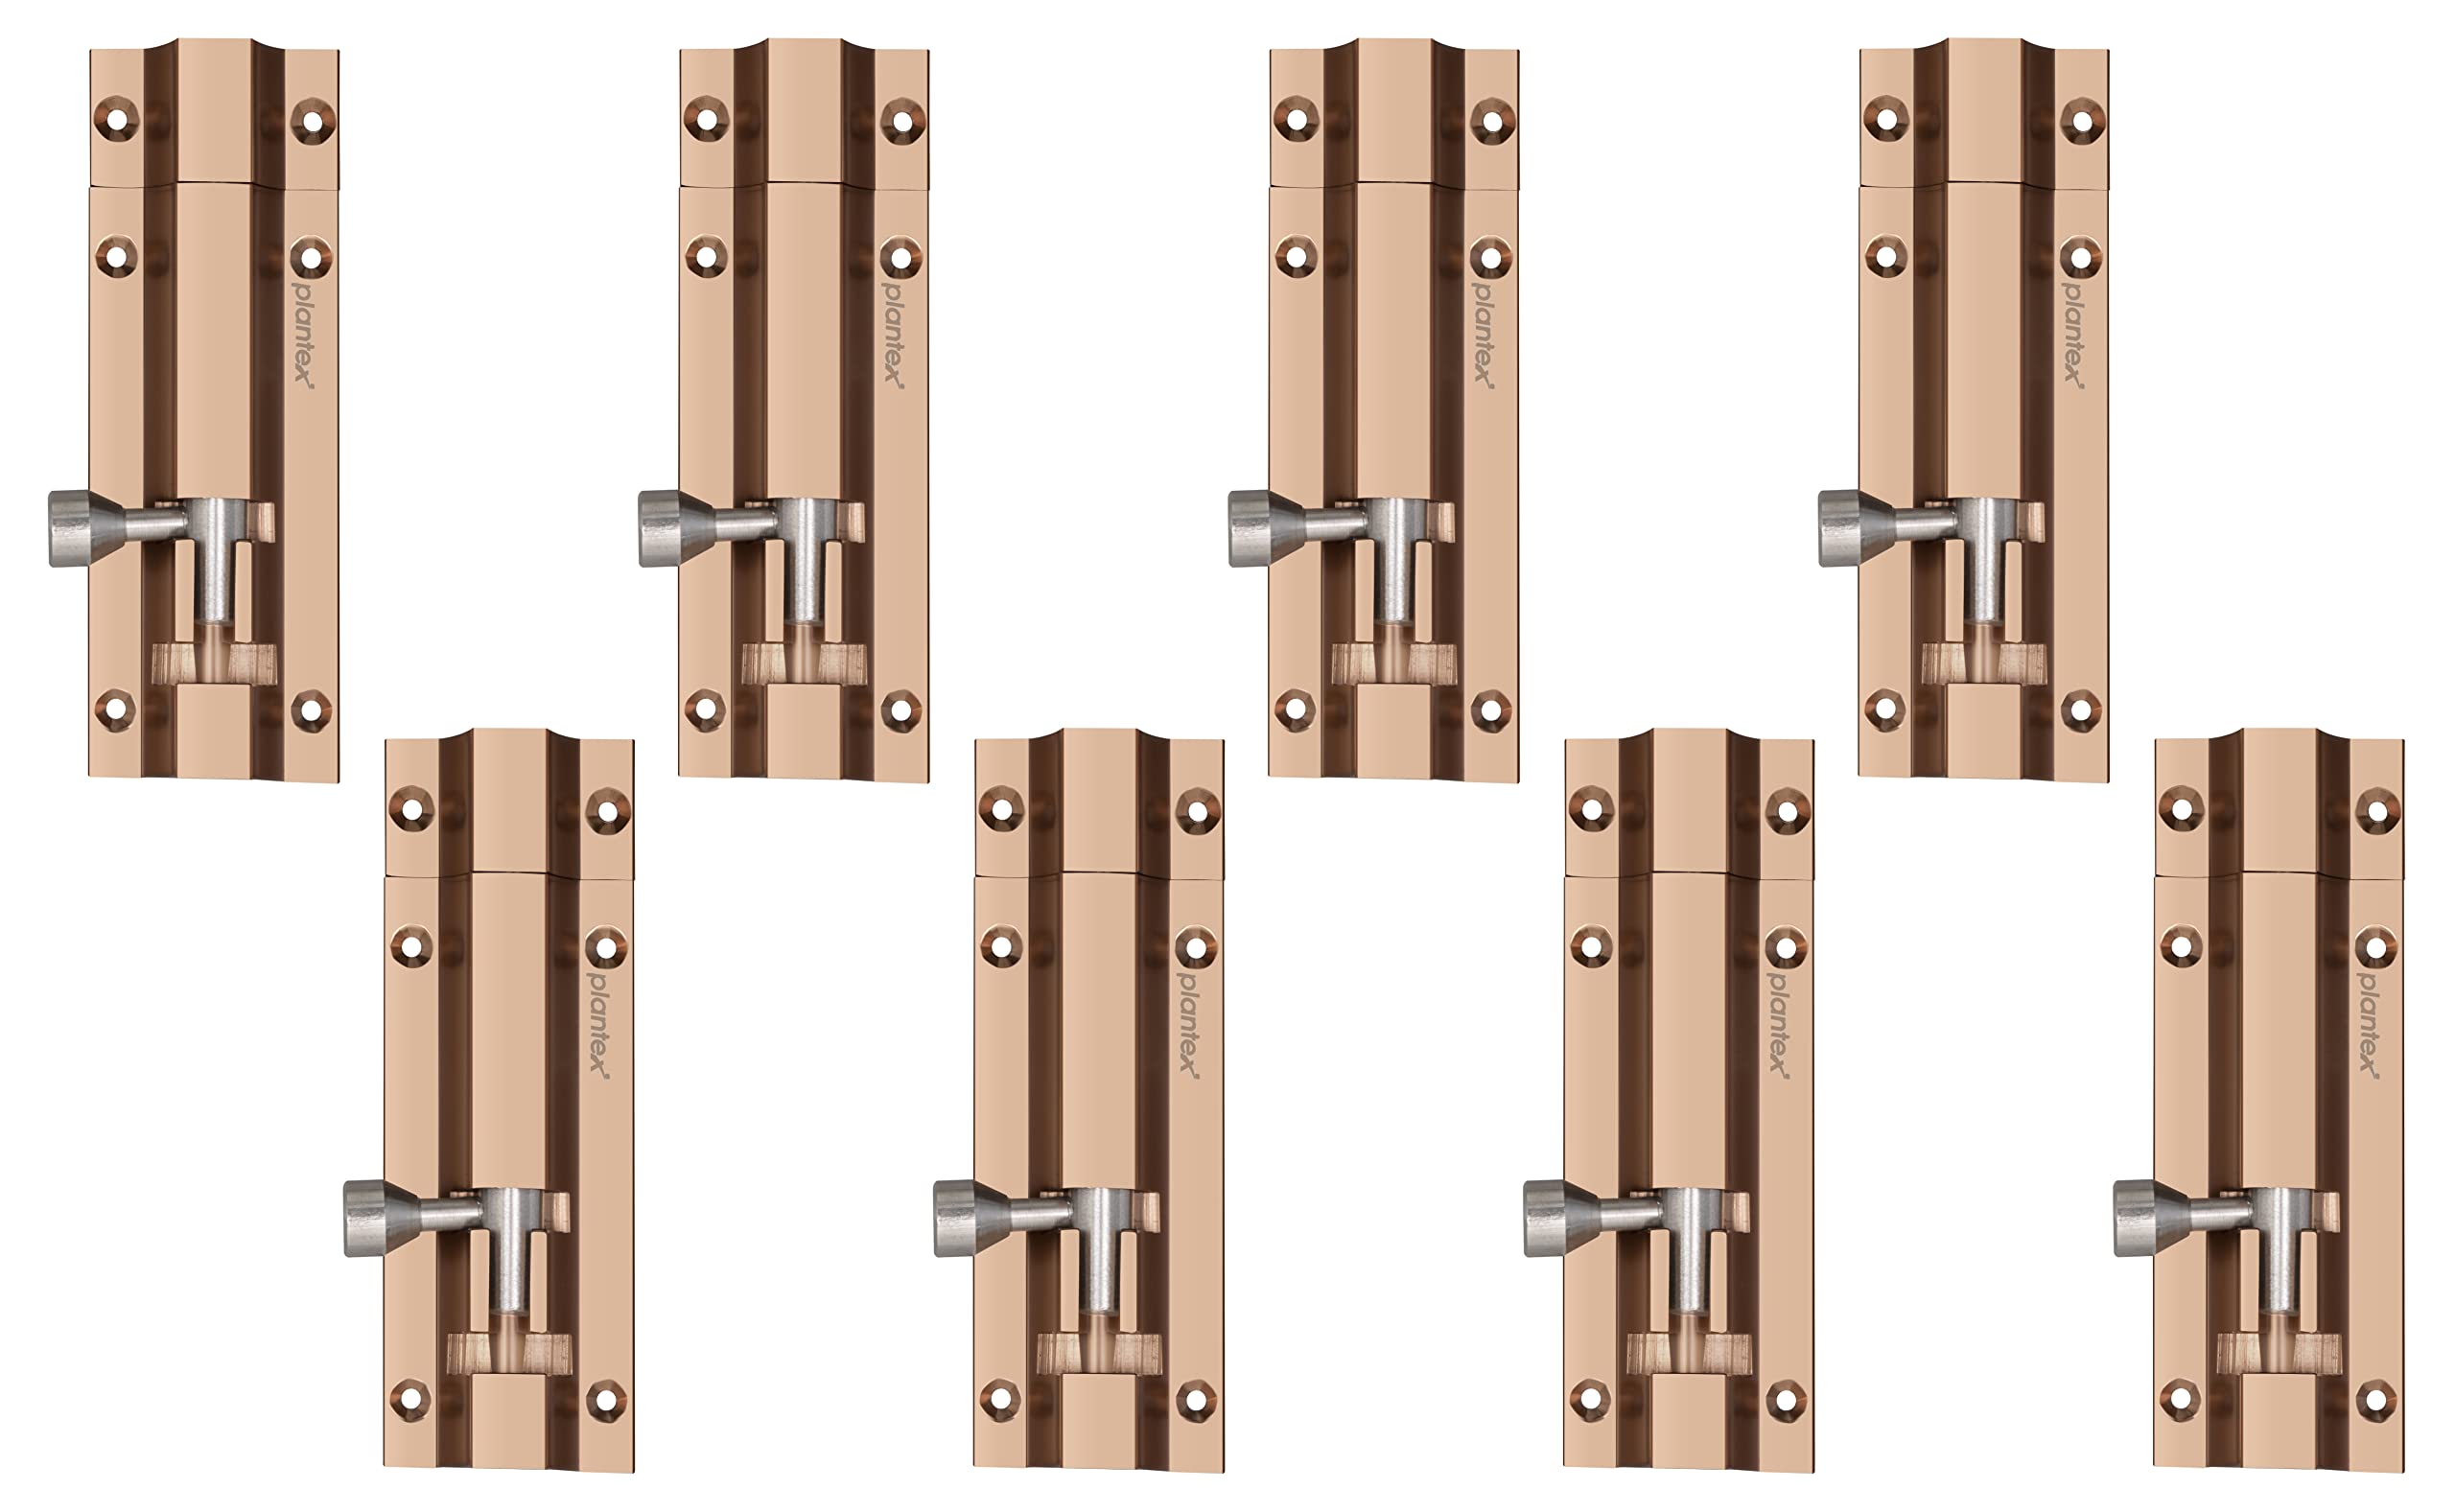 Plantex Heavy Duty 4-inch Joint-Less Tower Bolt for Wooden and PVC Doors for Home Main Door/Bathroom/Windows/Wardrobe - Pack of 8 (704, Rose Gold)